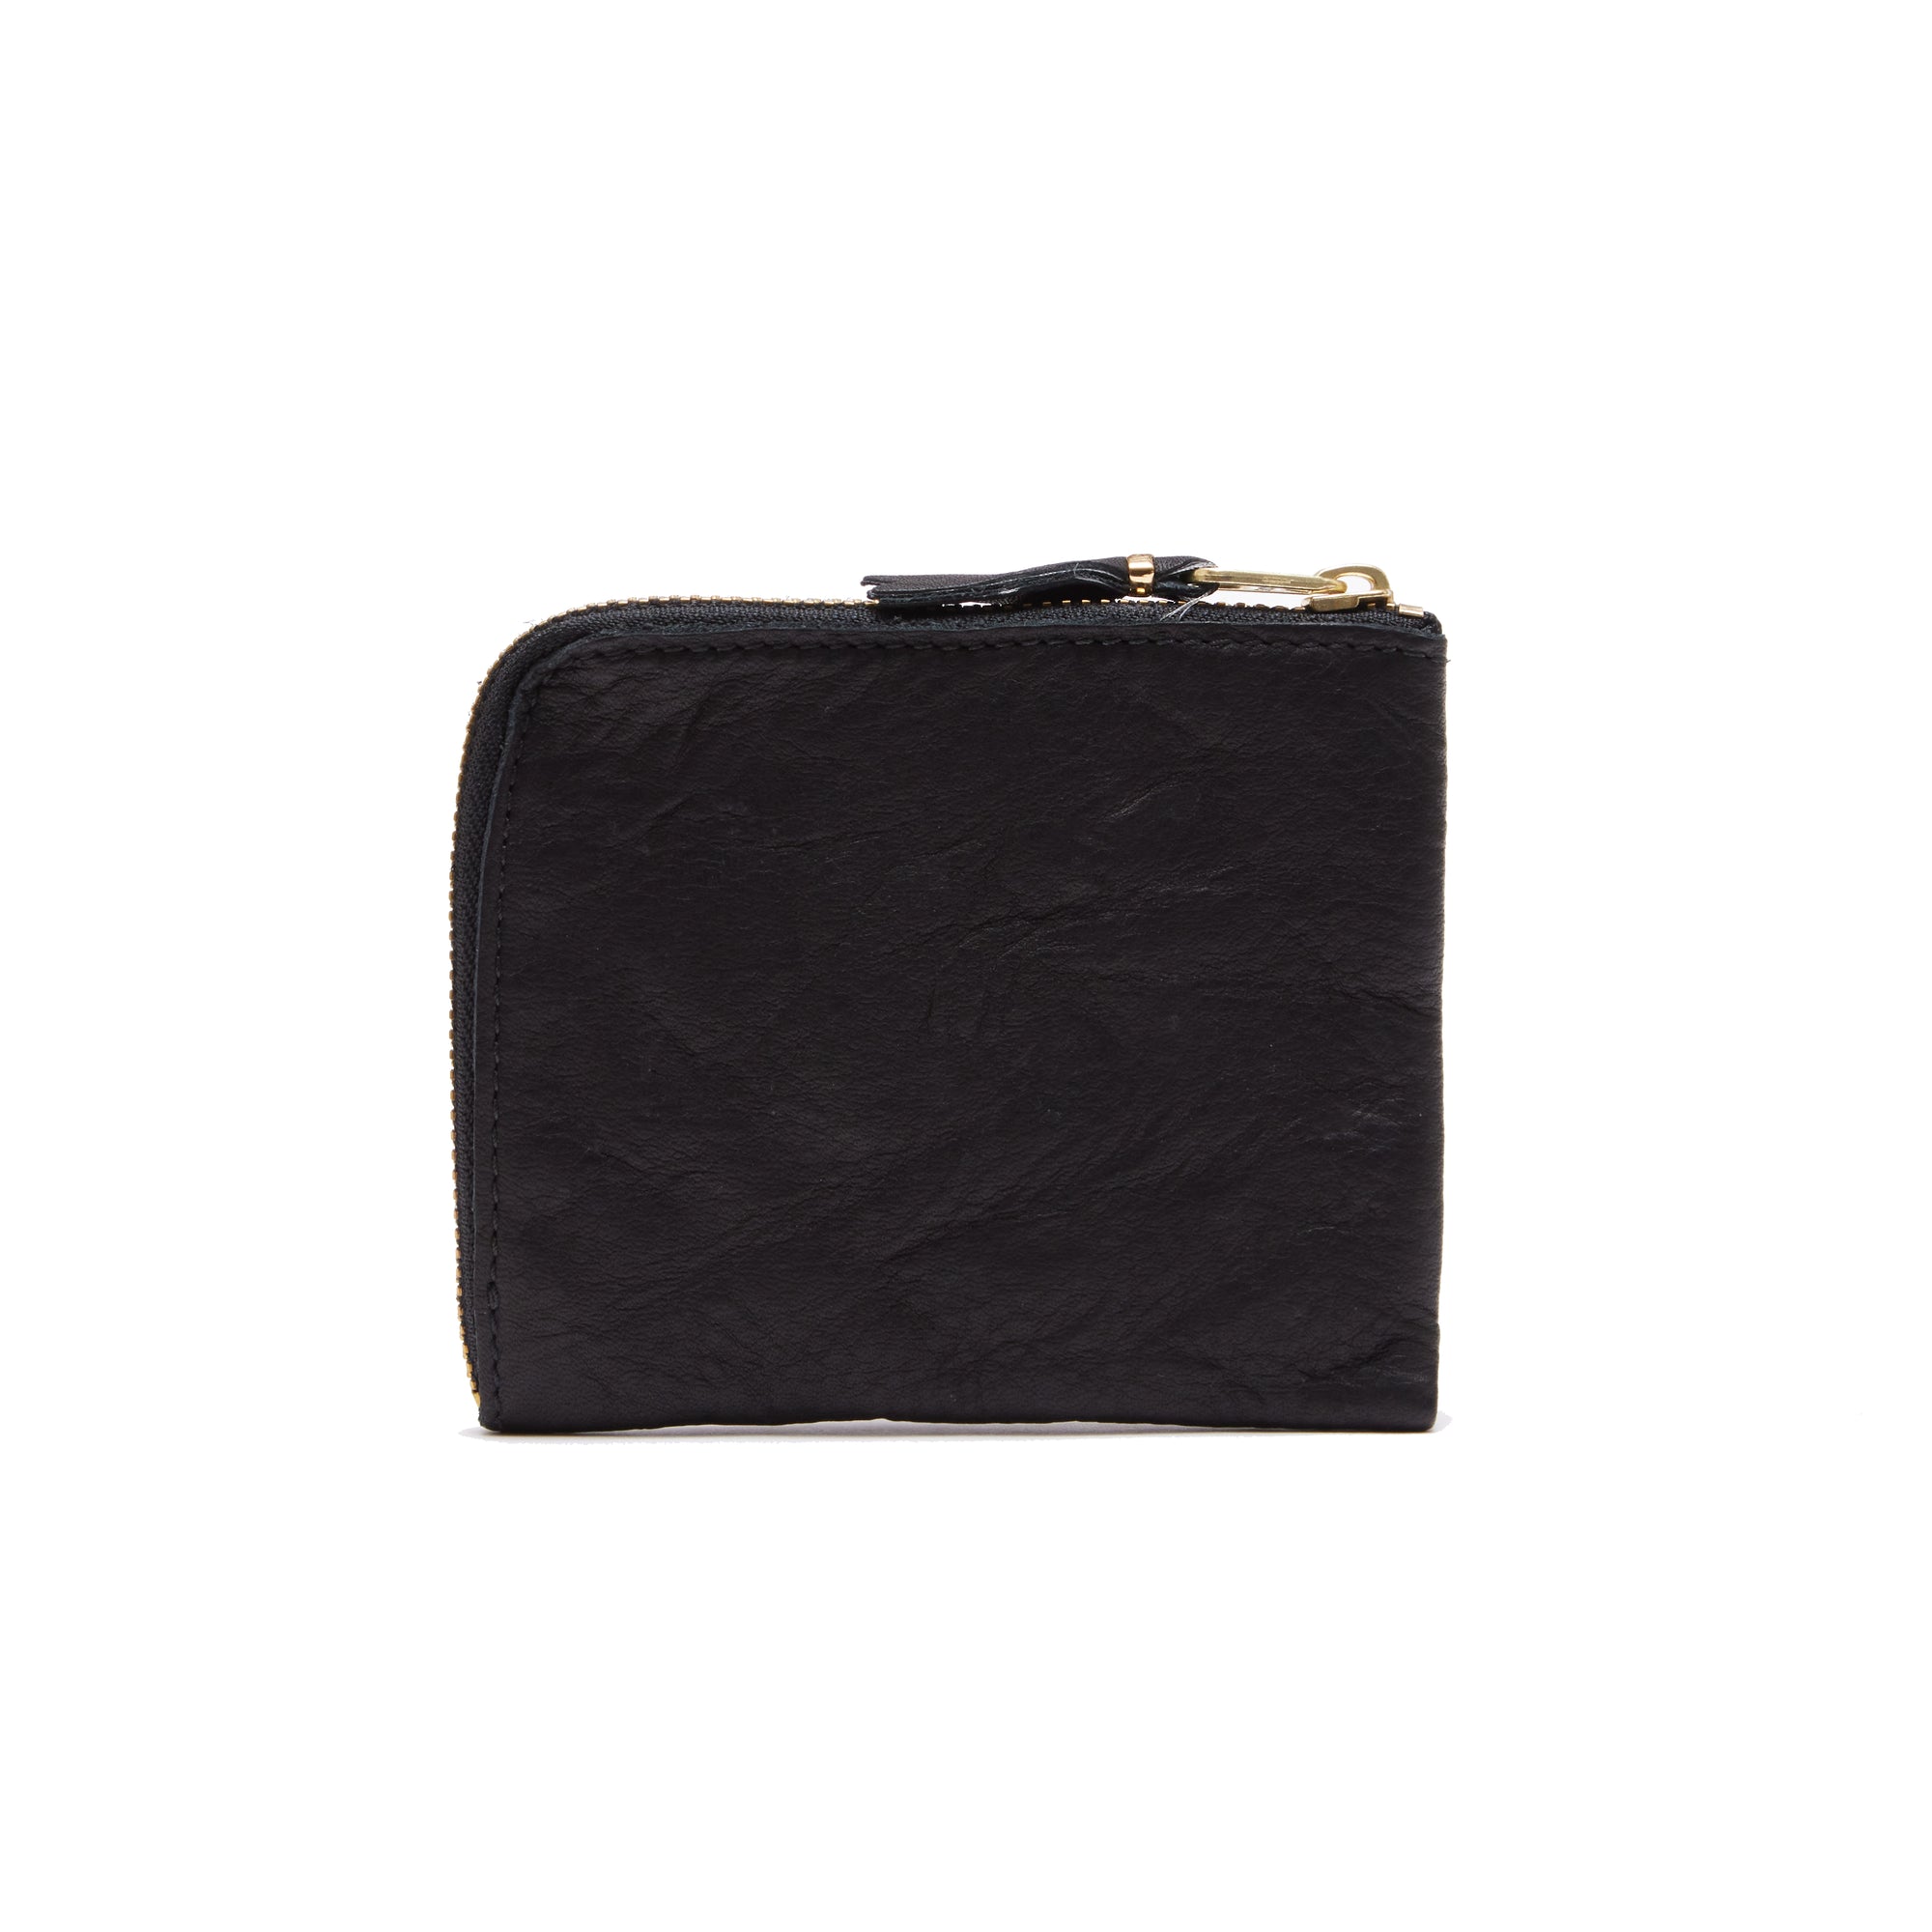 CDG WALLET - Washed Wallet - (8Z-Y031 Black) view 2